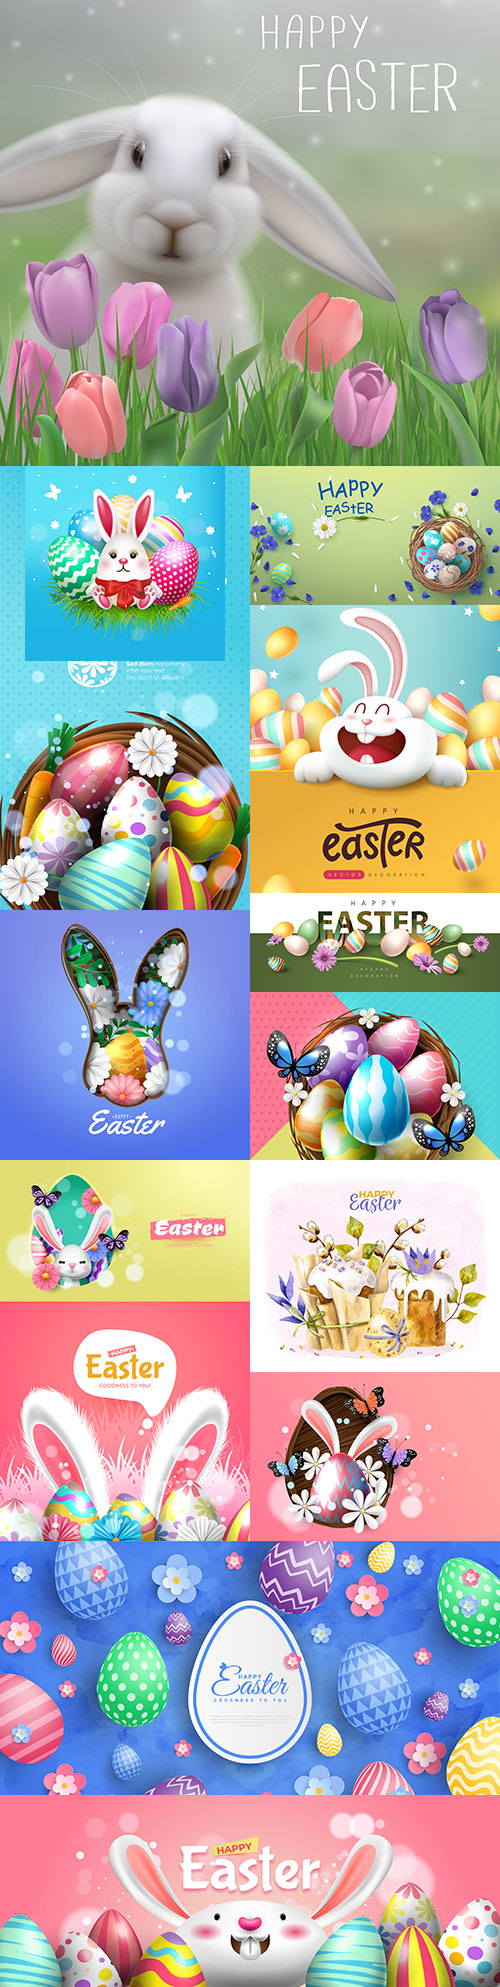 Happy Easter background and design banner with colorful eggs 2
